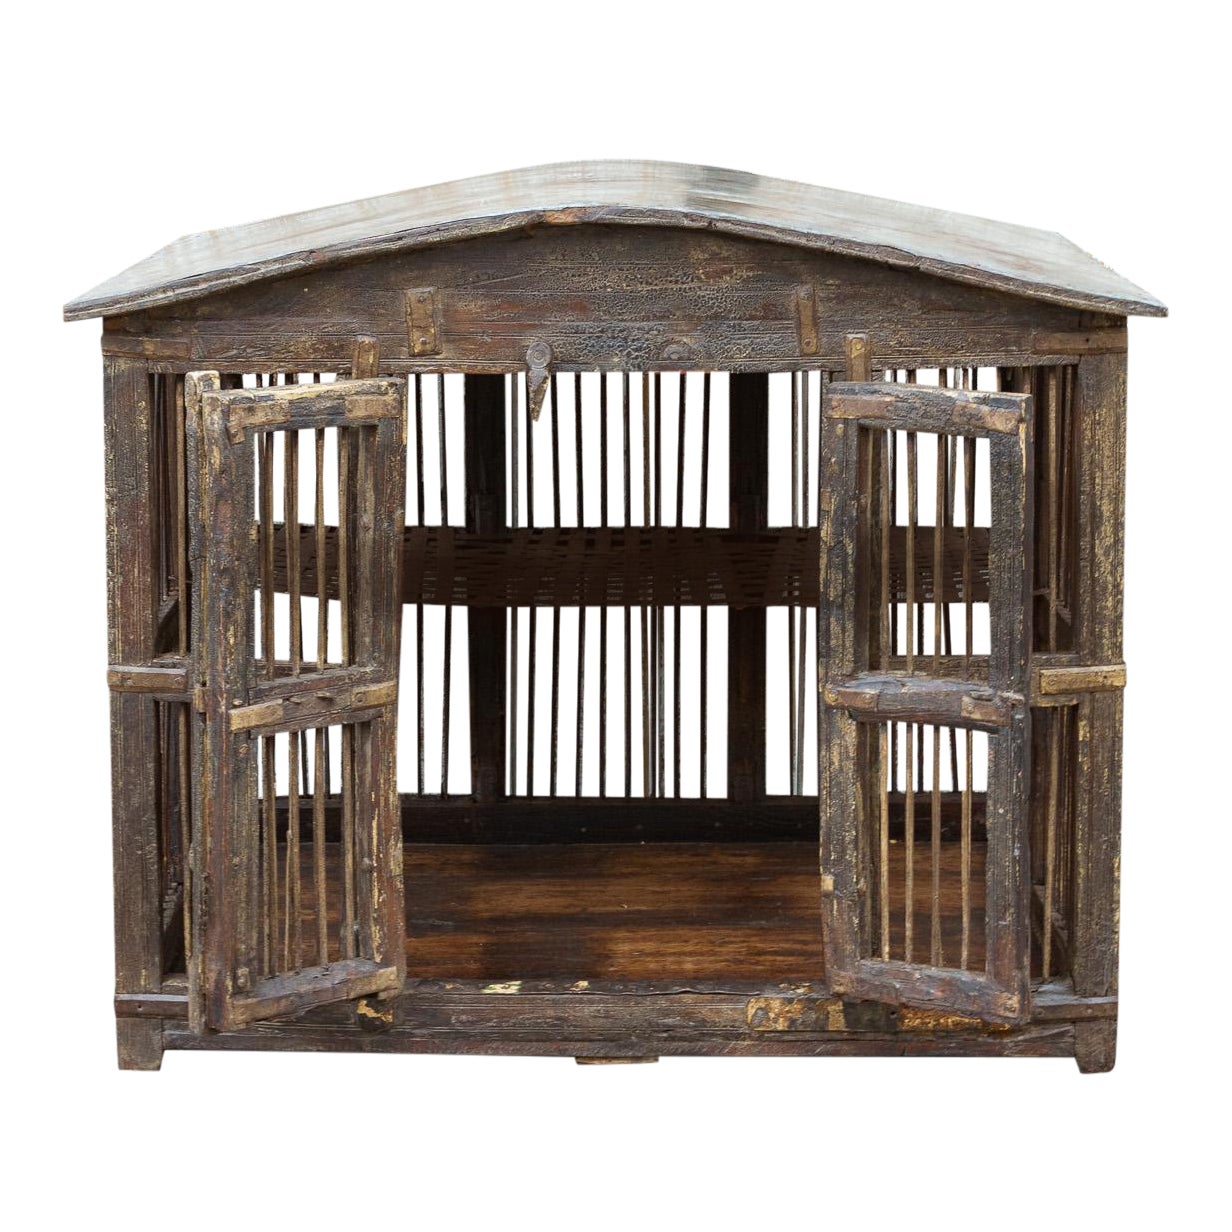 Rustic Iron Grill Indian Kitchen Cabinet~P77619283